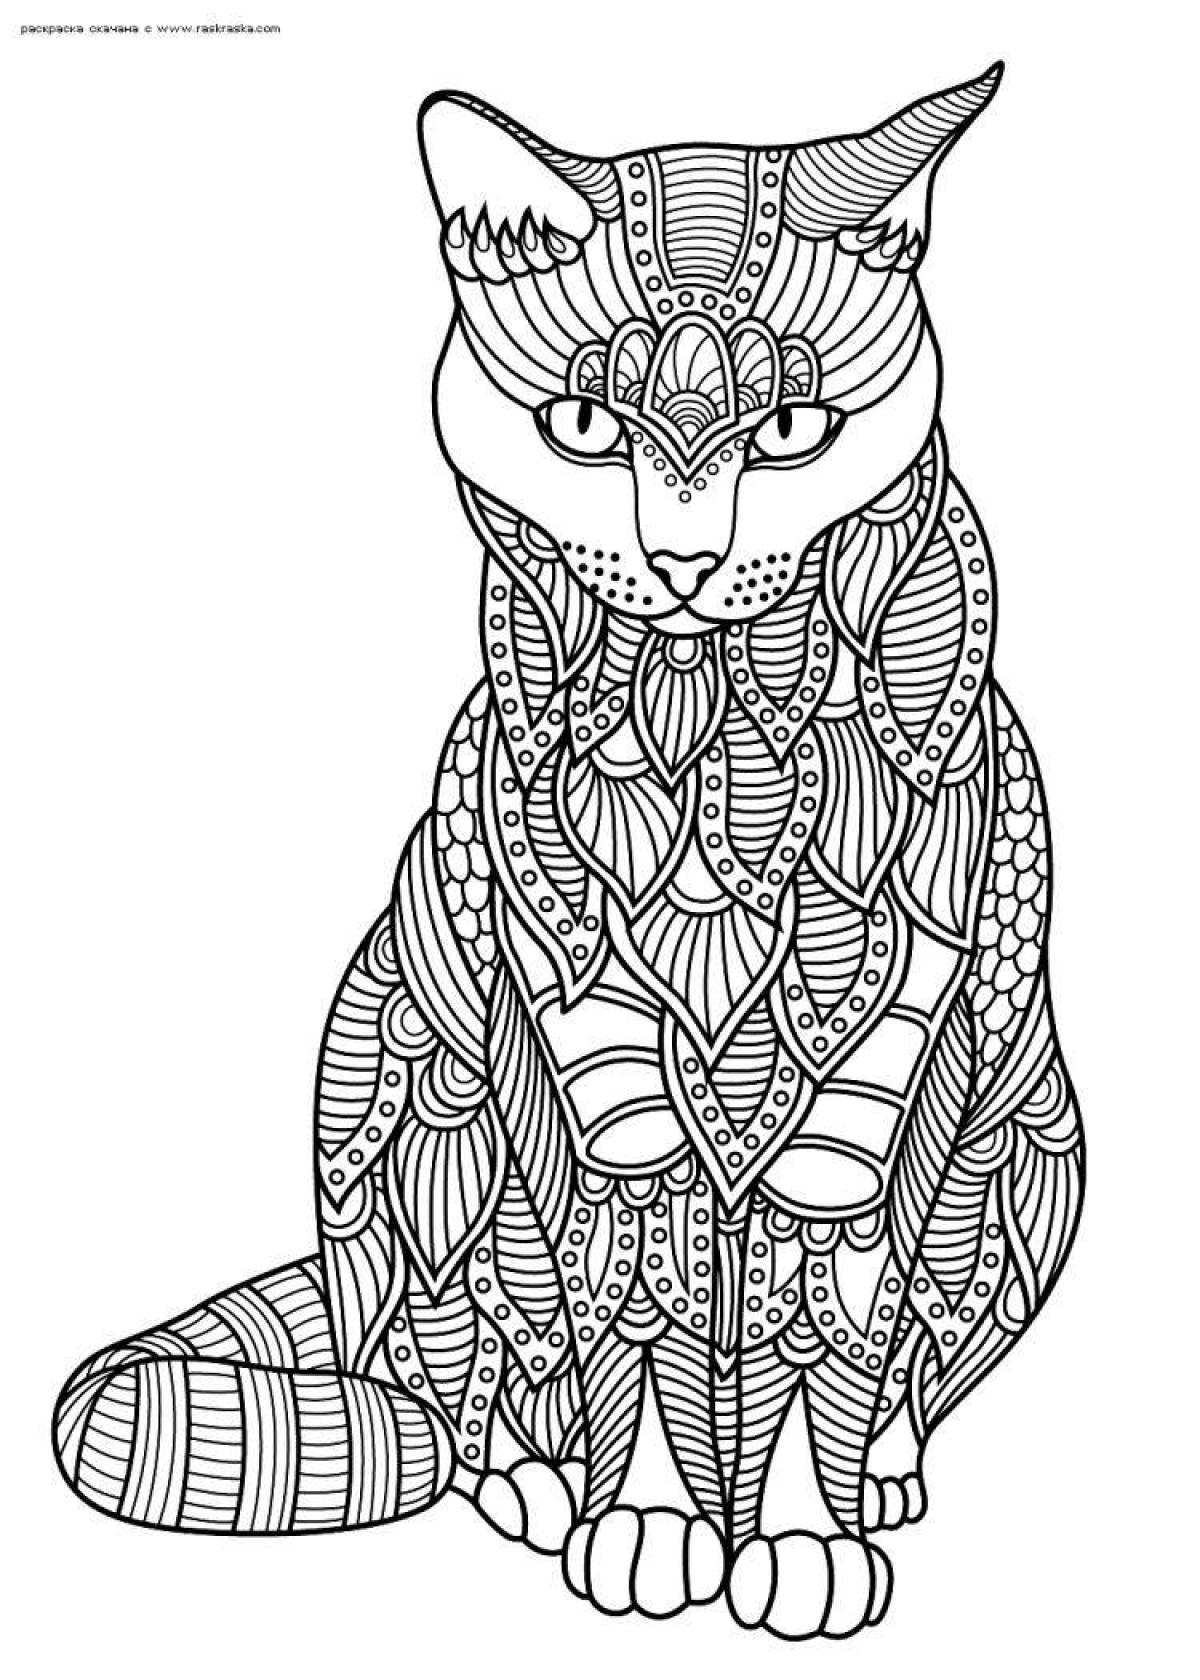 Colouring adorable antistress cat